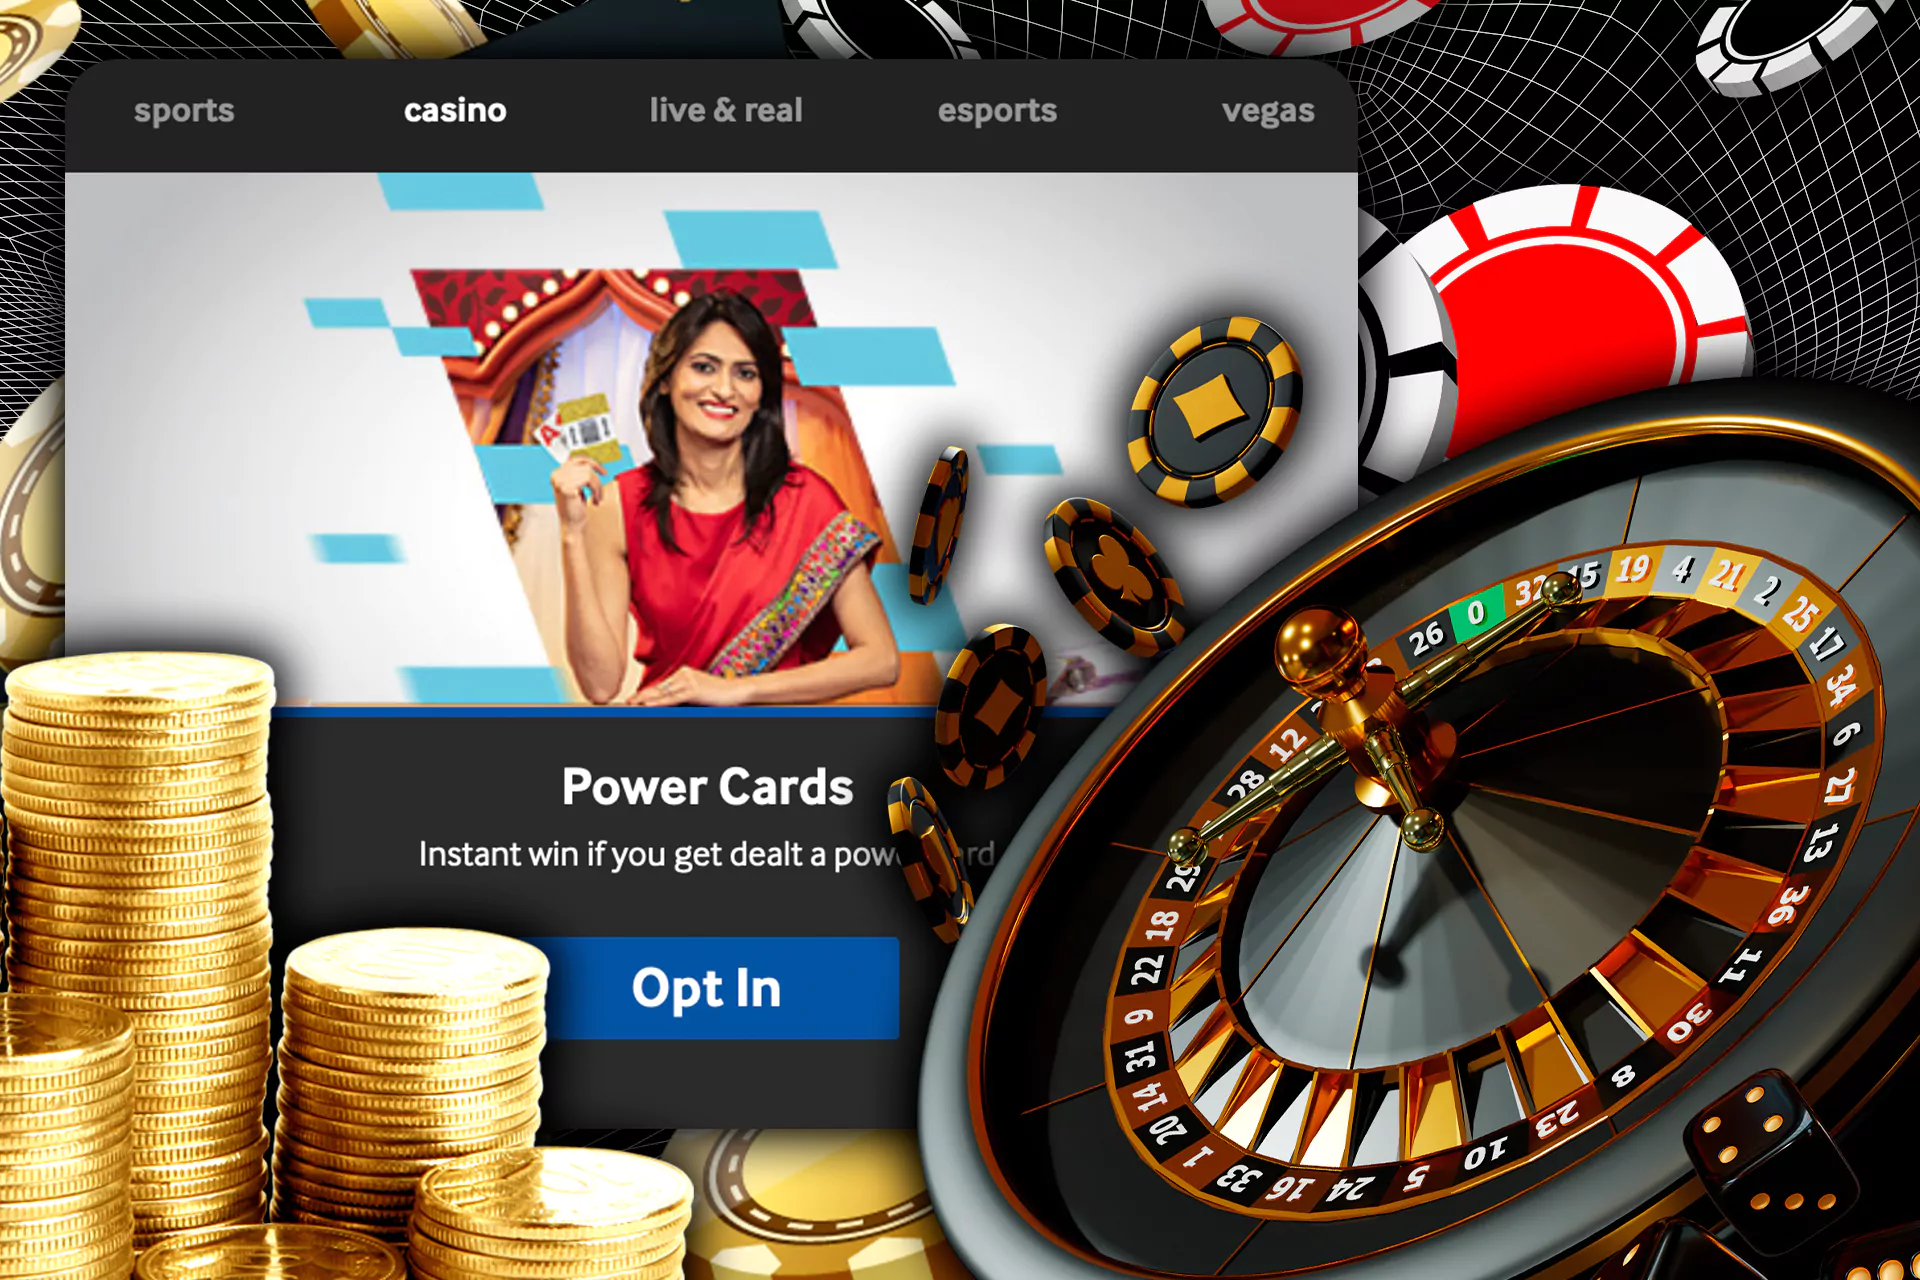 Casino Power Cards gives you a chance of instant winnings.